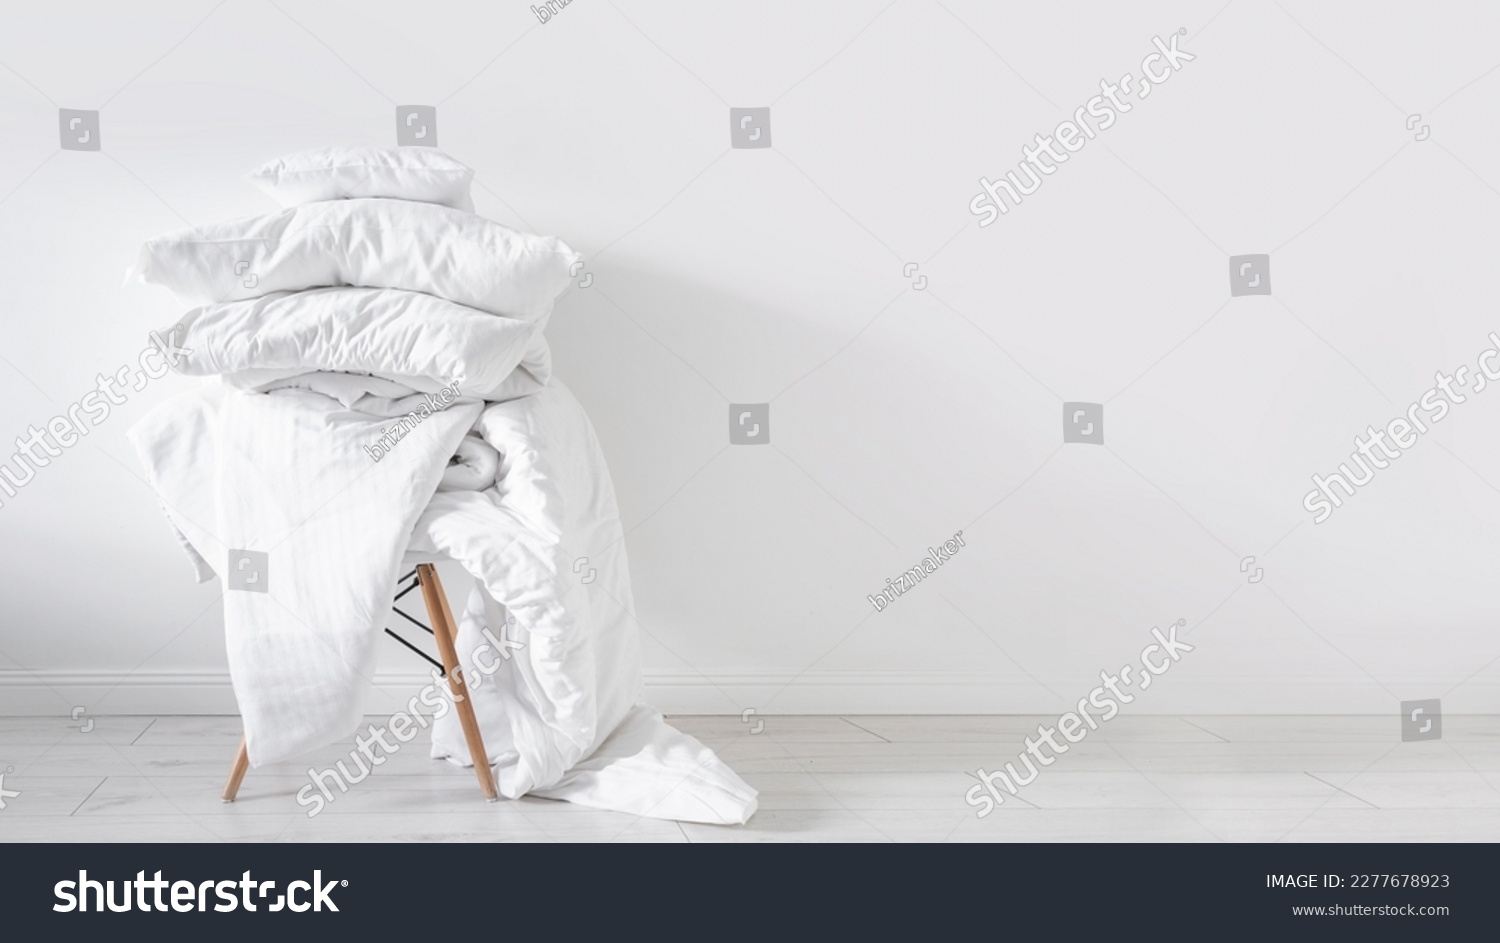 dirty blanket, linen bedding, cotton sheets, cushions and duvet with natural material on chair on white wall background with copy space, washing concept  #2277678923